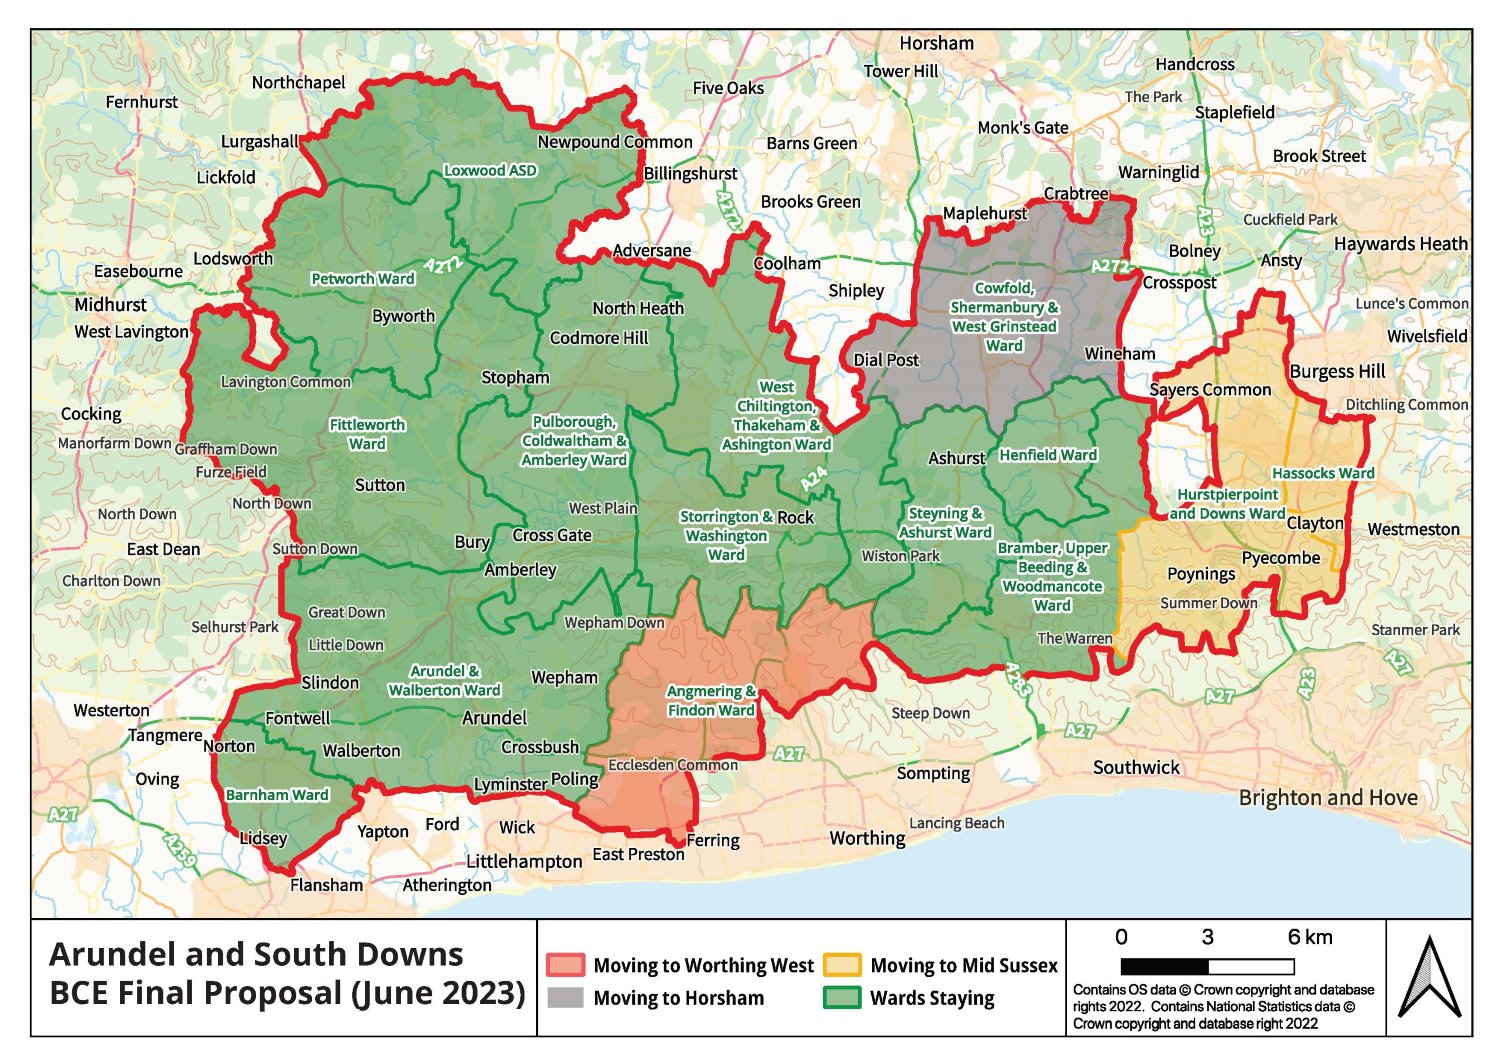 Map of Arundel and South Downs 2019 Borders vs Final Boundary Changes, showing which areas are staying in Arundel and South Downs and which are going to different constituencies.